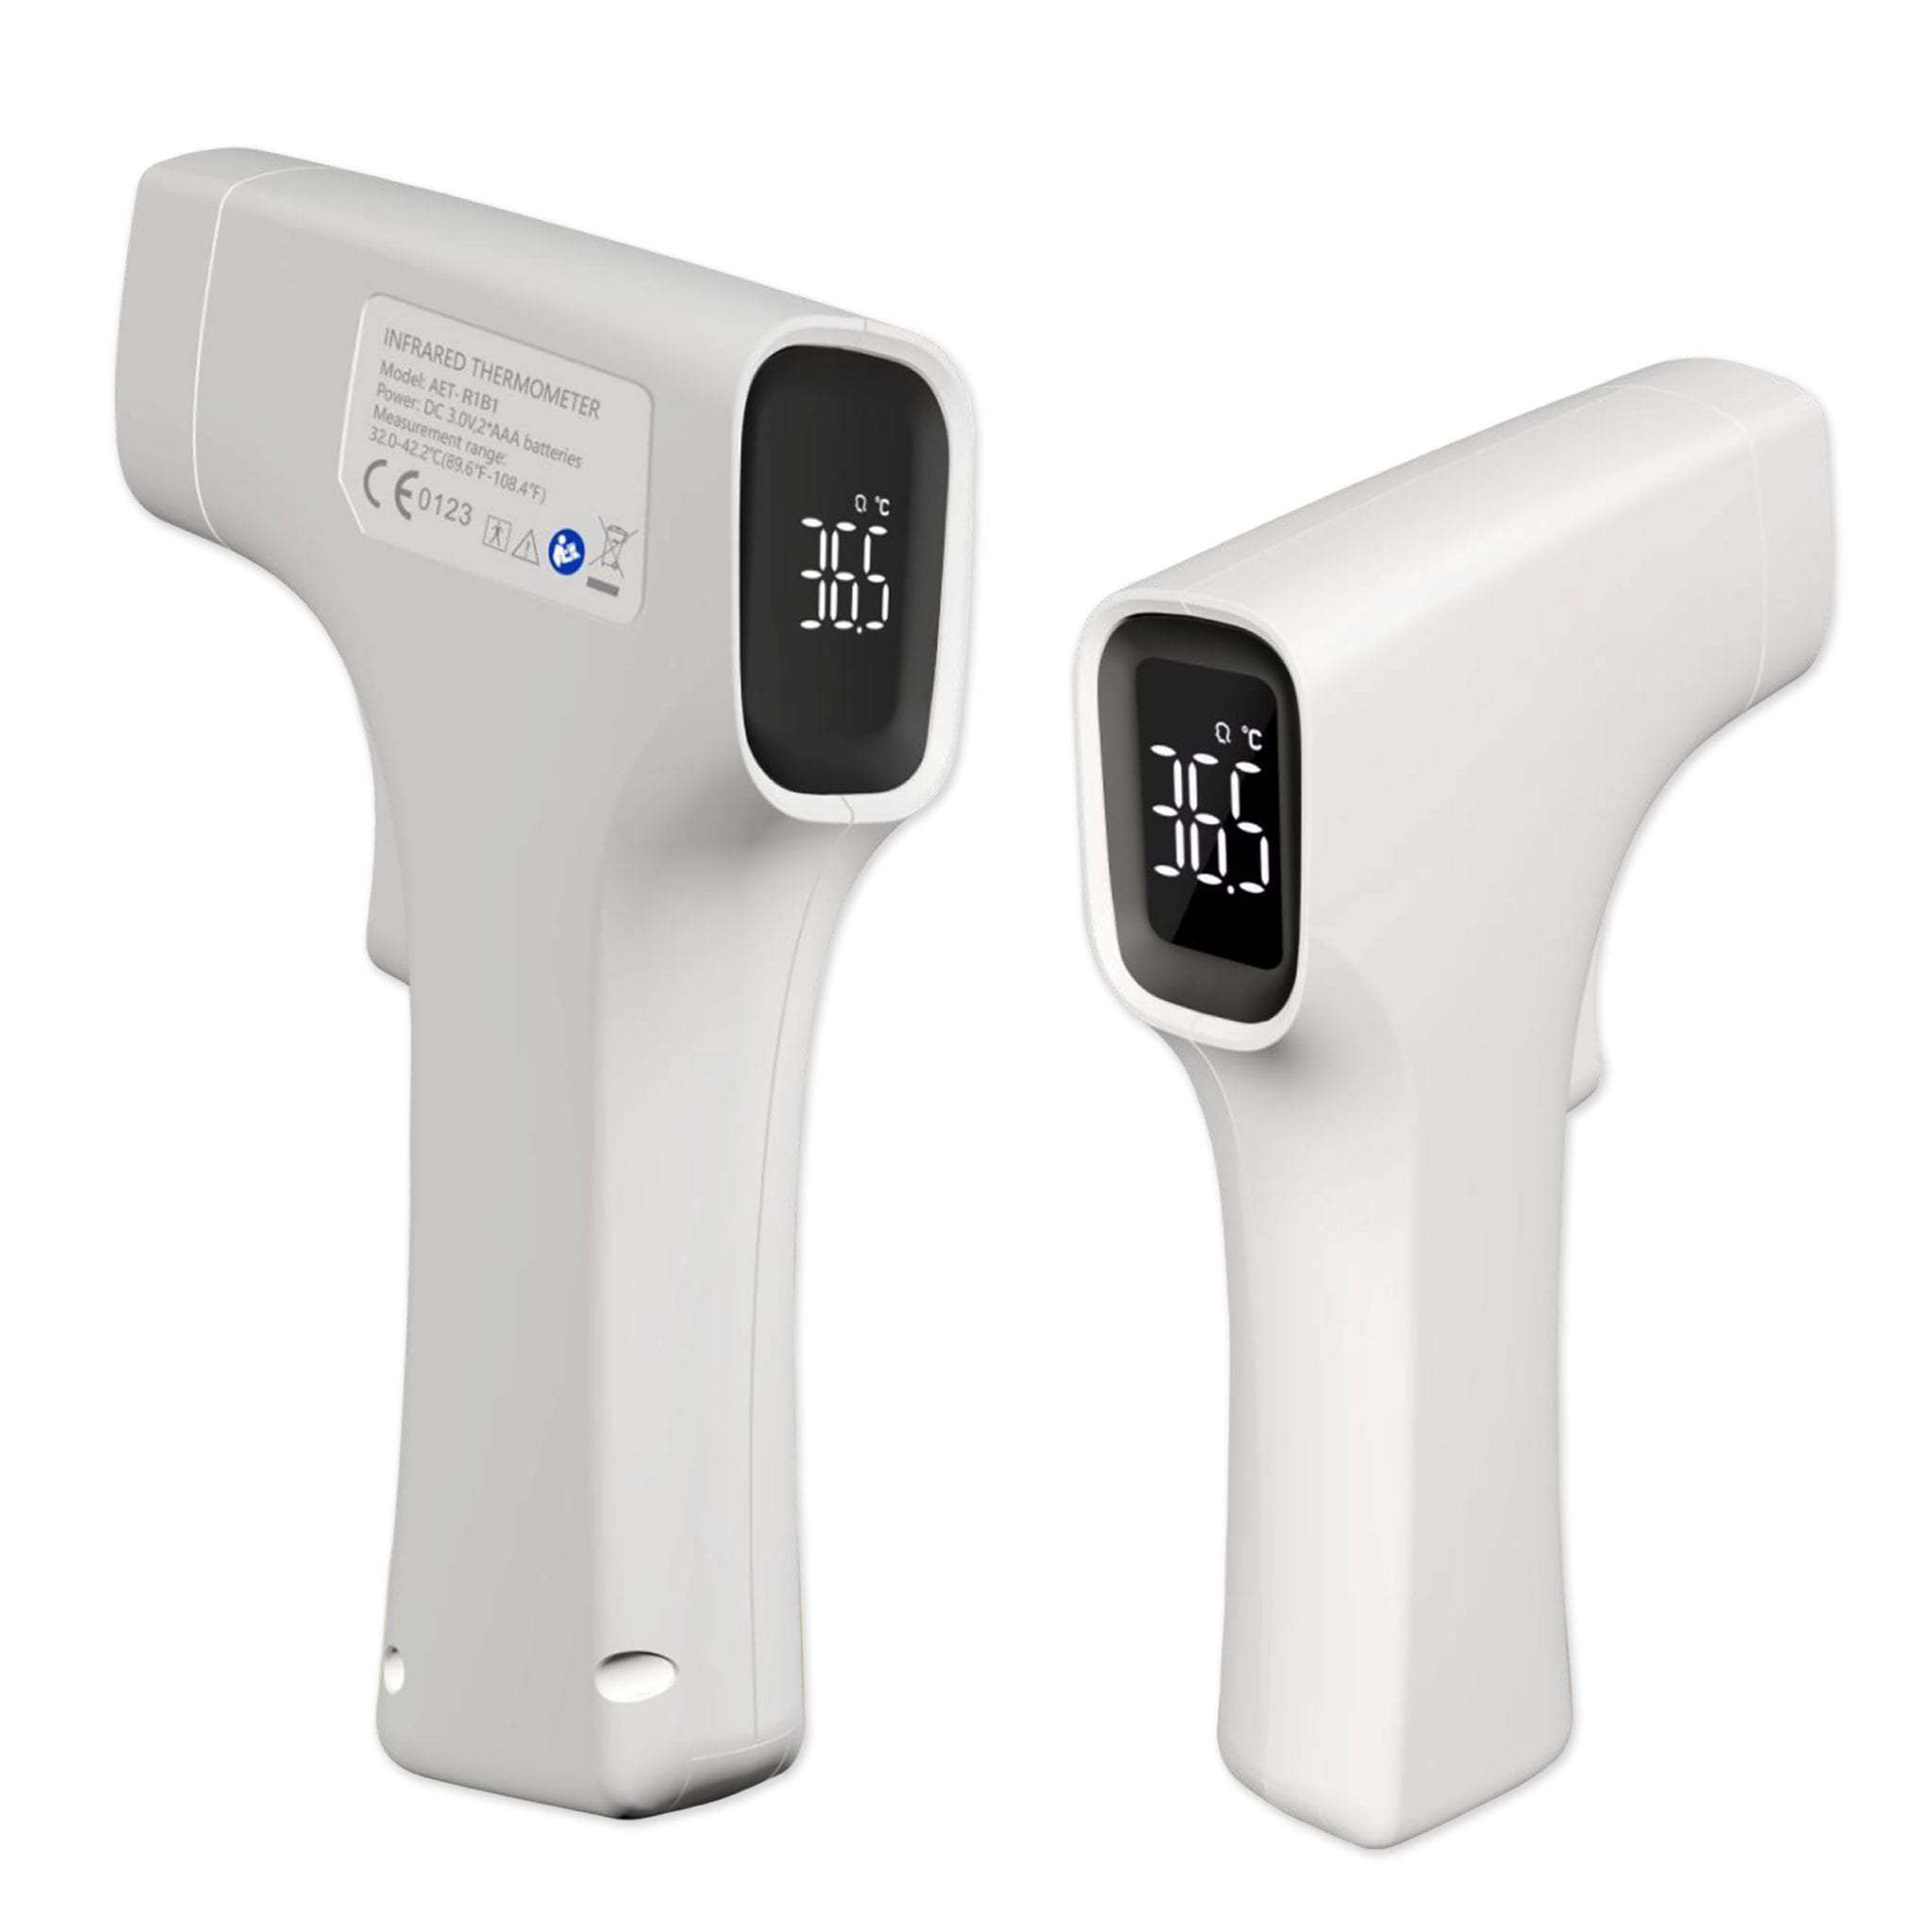 Infrared Digital LCD Forehead Thermometer NonContact Temperature Measurement FDA 